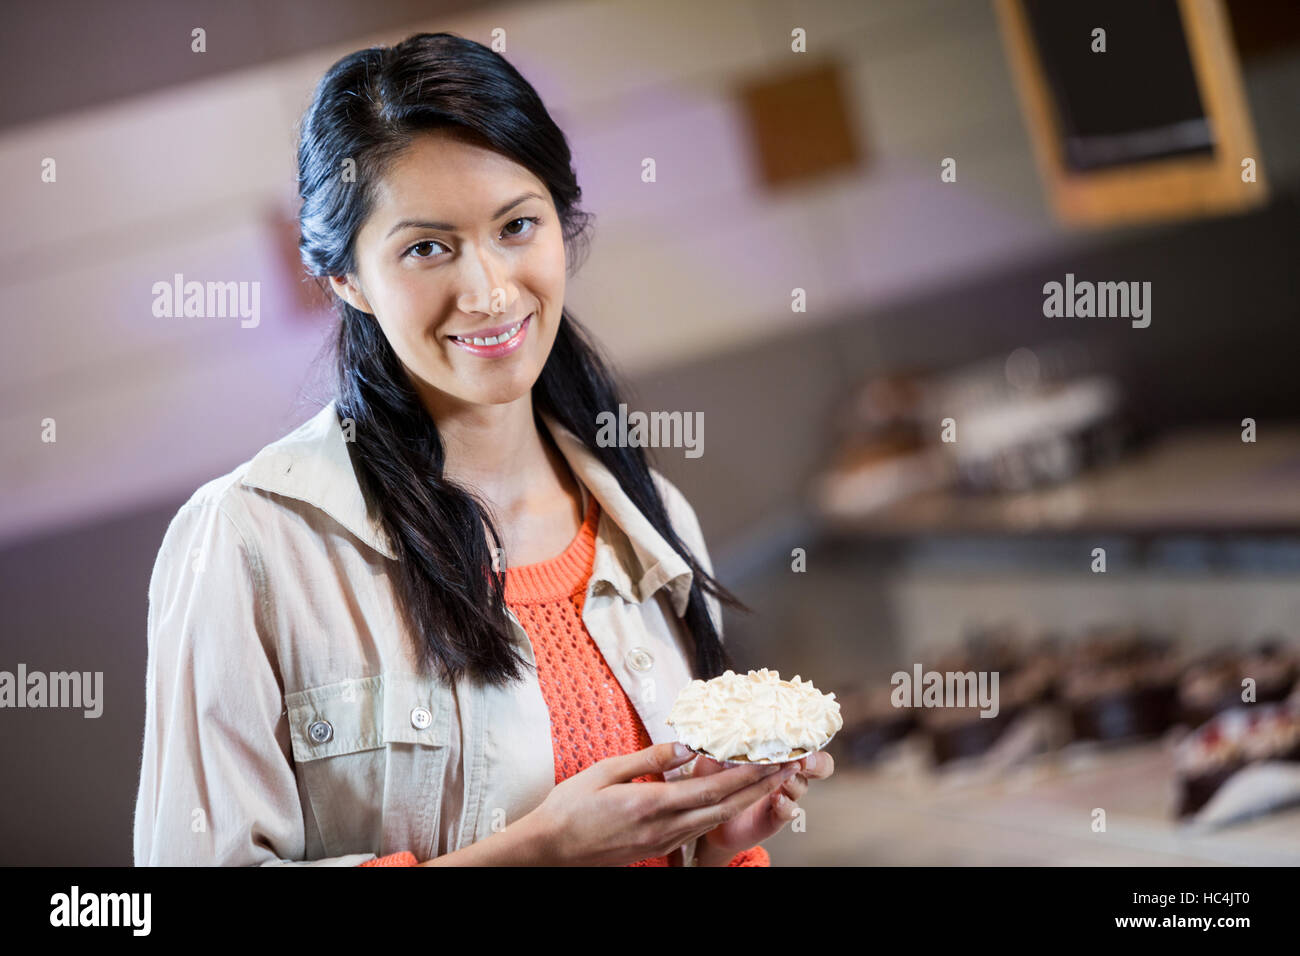 Portrait of woman holding sweet food Stock Photo